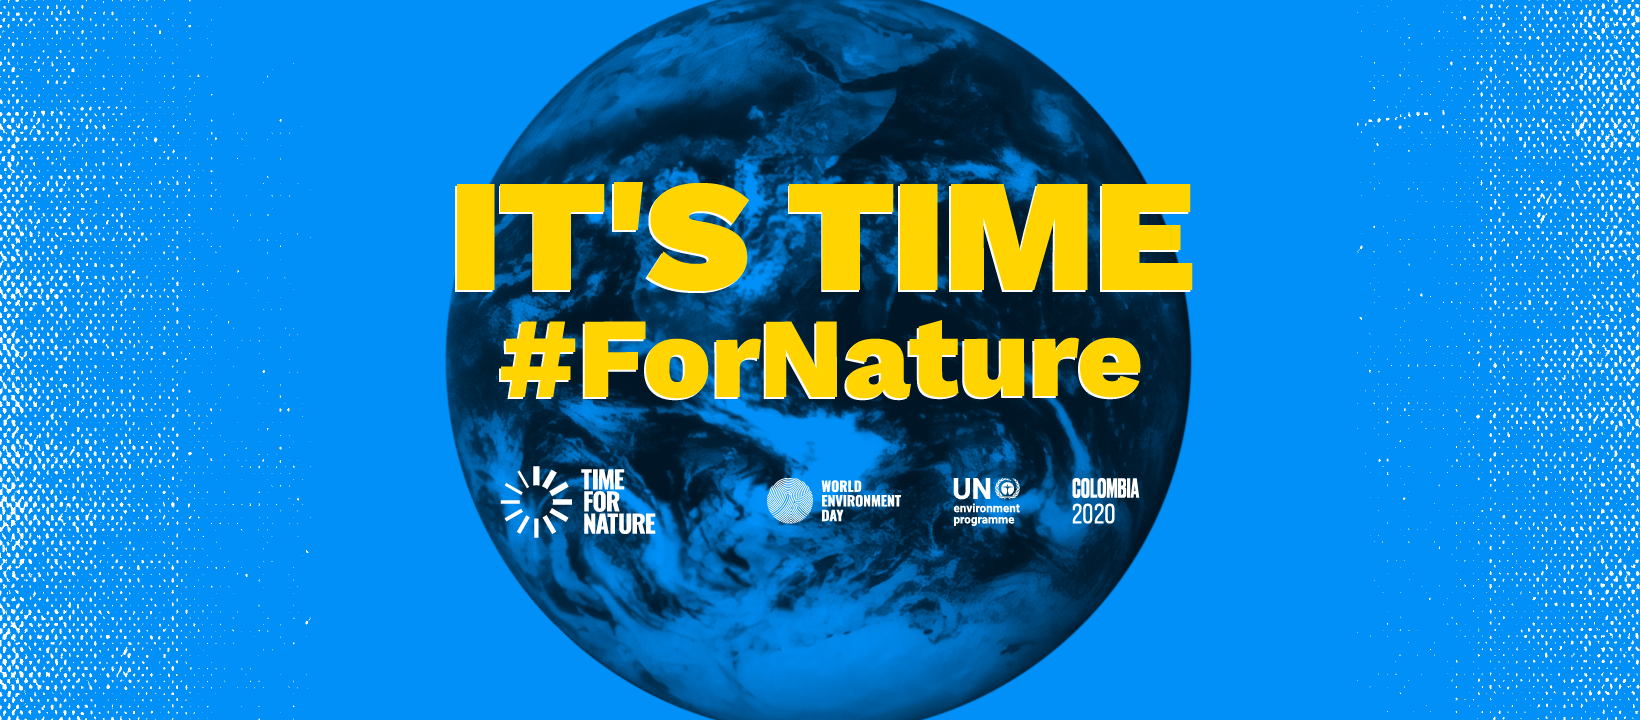 It's time #fornature